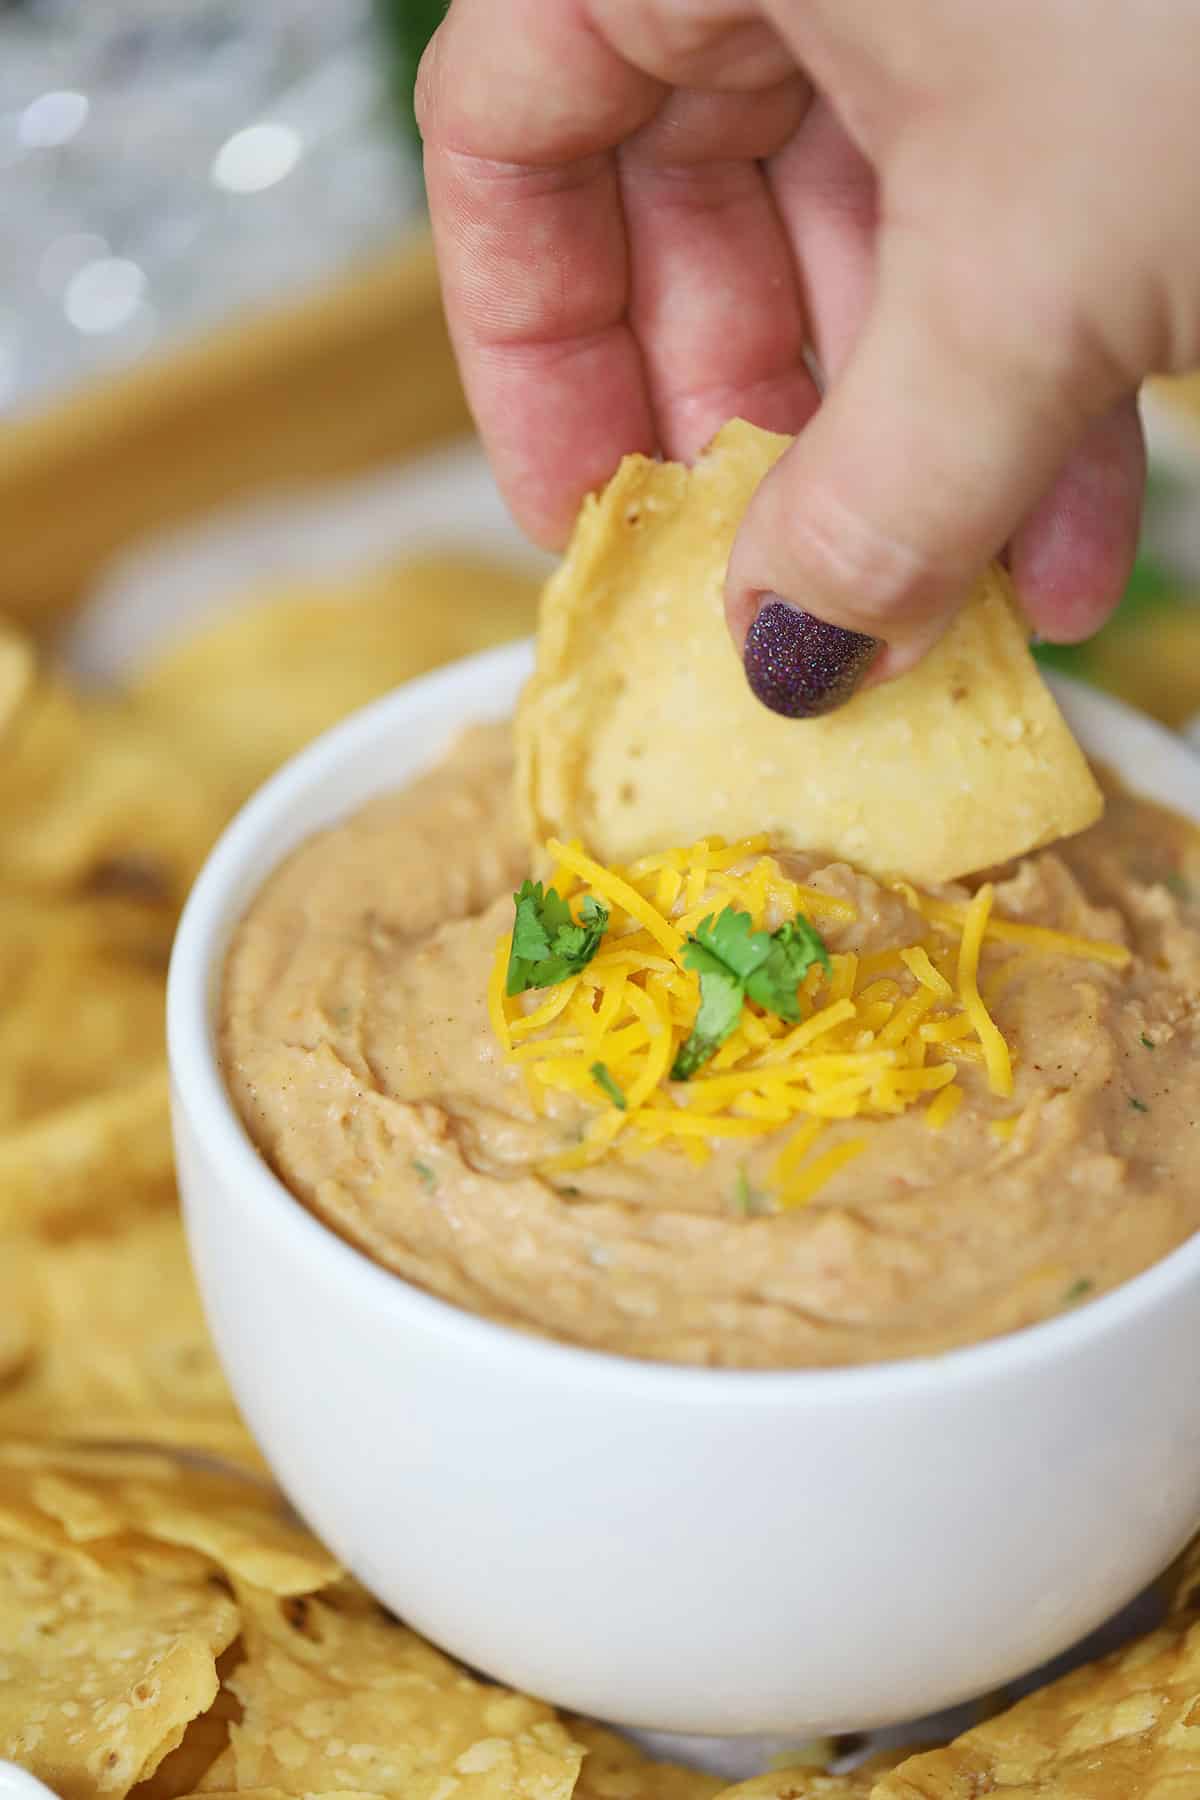 A hand with a chip scooping up some bean dip. 